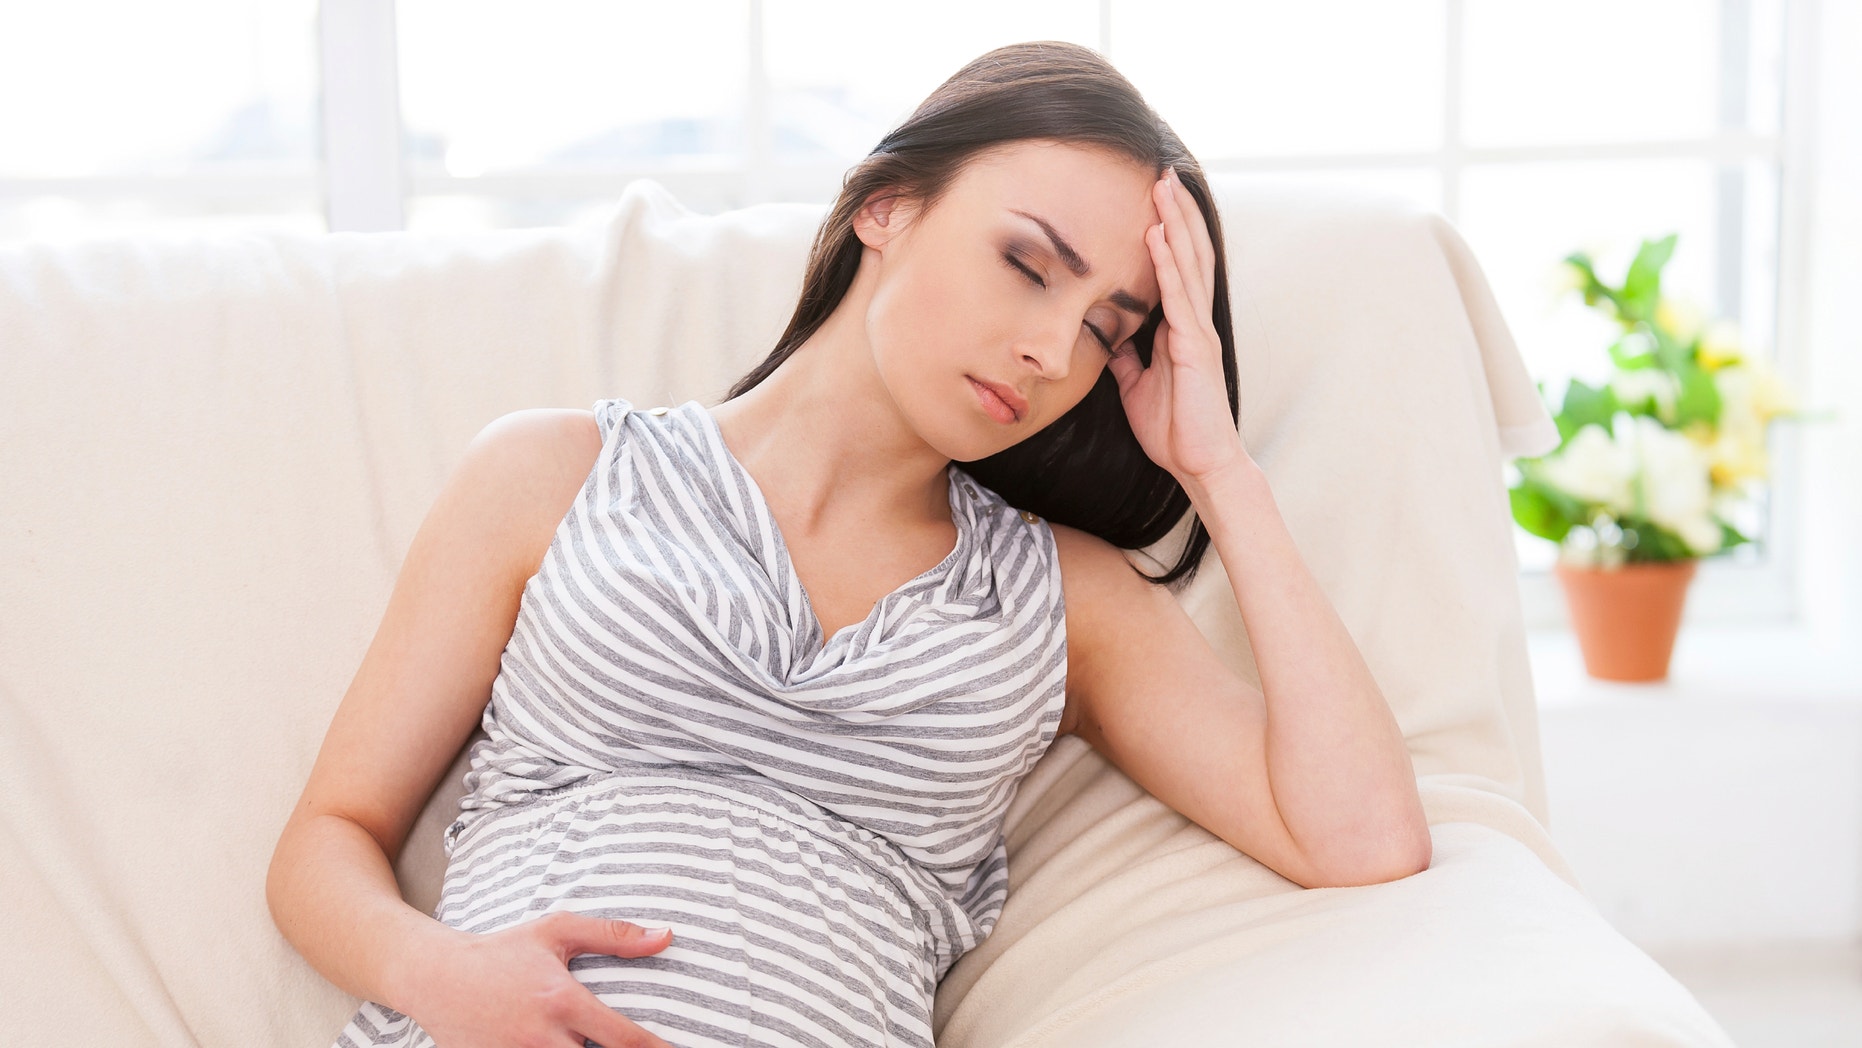 Struggling With Morning Sickness Depressed Pregnant Woman Holding Hand On Head And Keeping Eyes Closed